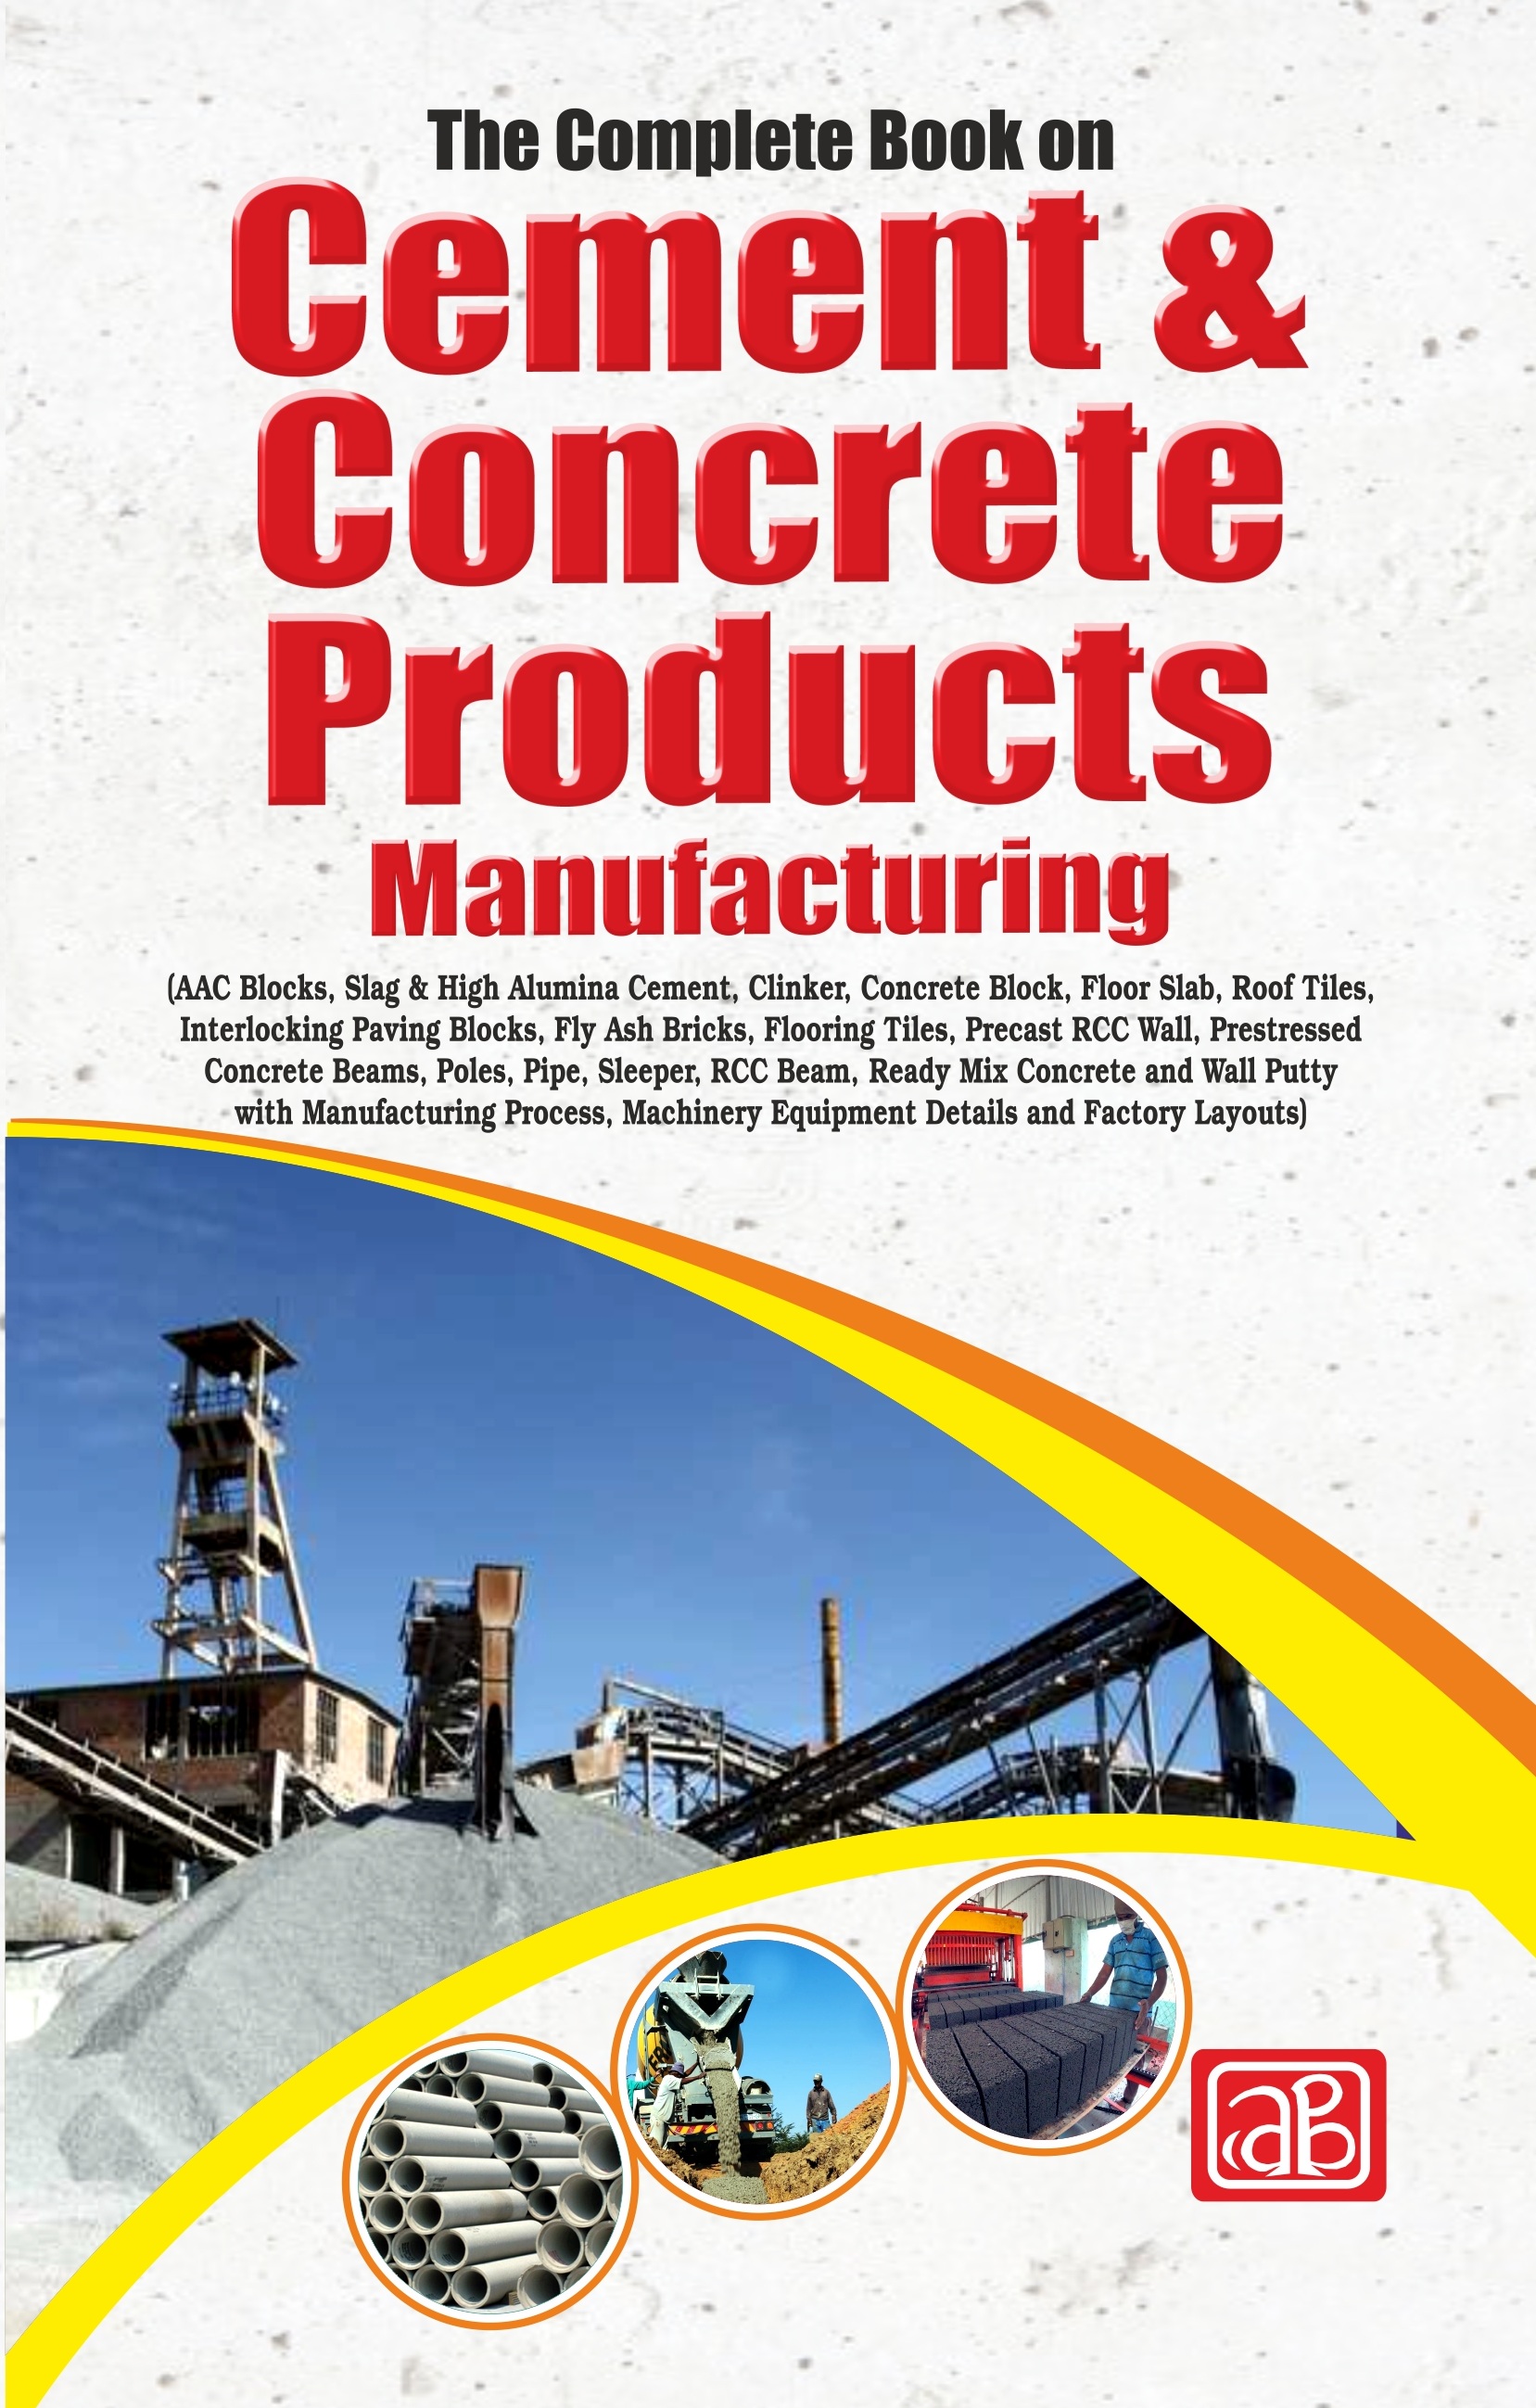 The Complete Book on Cement & Concrete Products Manufacturing (AAC Blocks, Slag & High Alumina Cement, Clinker, Concrete Block, Floor Slab, Roof Tiles, Interlocking Paving Blocks, Fly Ash Bricks, Flooring Tiles, Precast RCC Wall, Prestressed Concrete Beams, Poles, Pipe, Sleeper, RCC Beam, Ready Mix Concrete and Wall Putty with Manufacturing Process, Machinery Equipment Details and Factory Layouts)